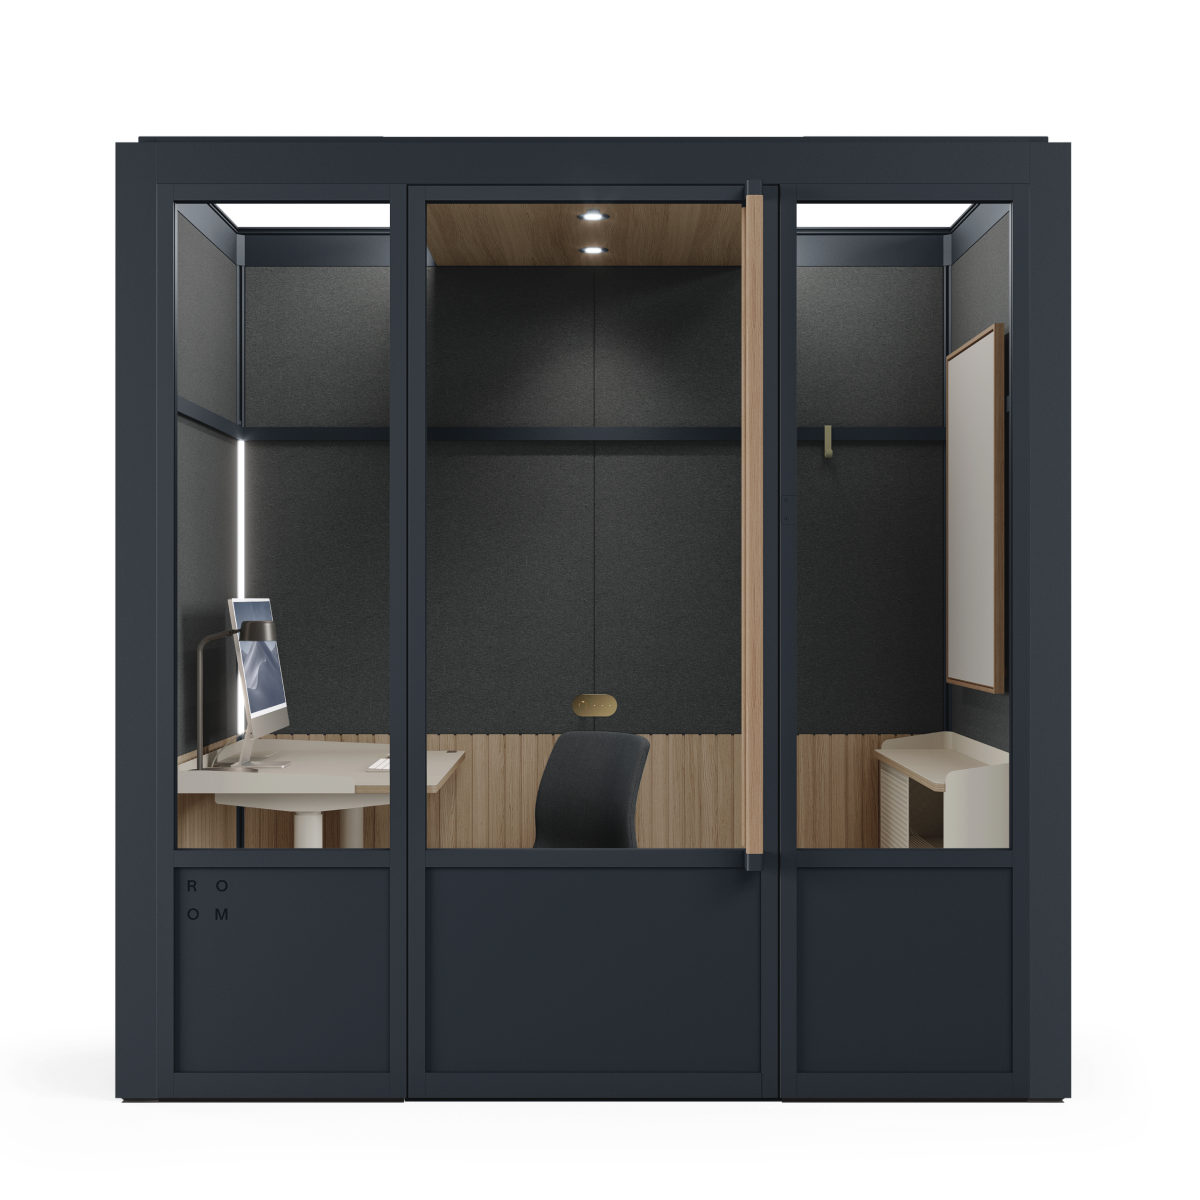 A Guide to Acoustic Phone Booths & Meeting Pods